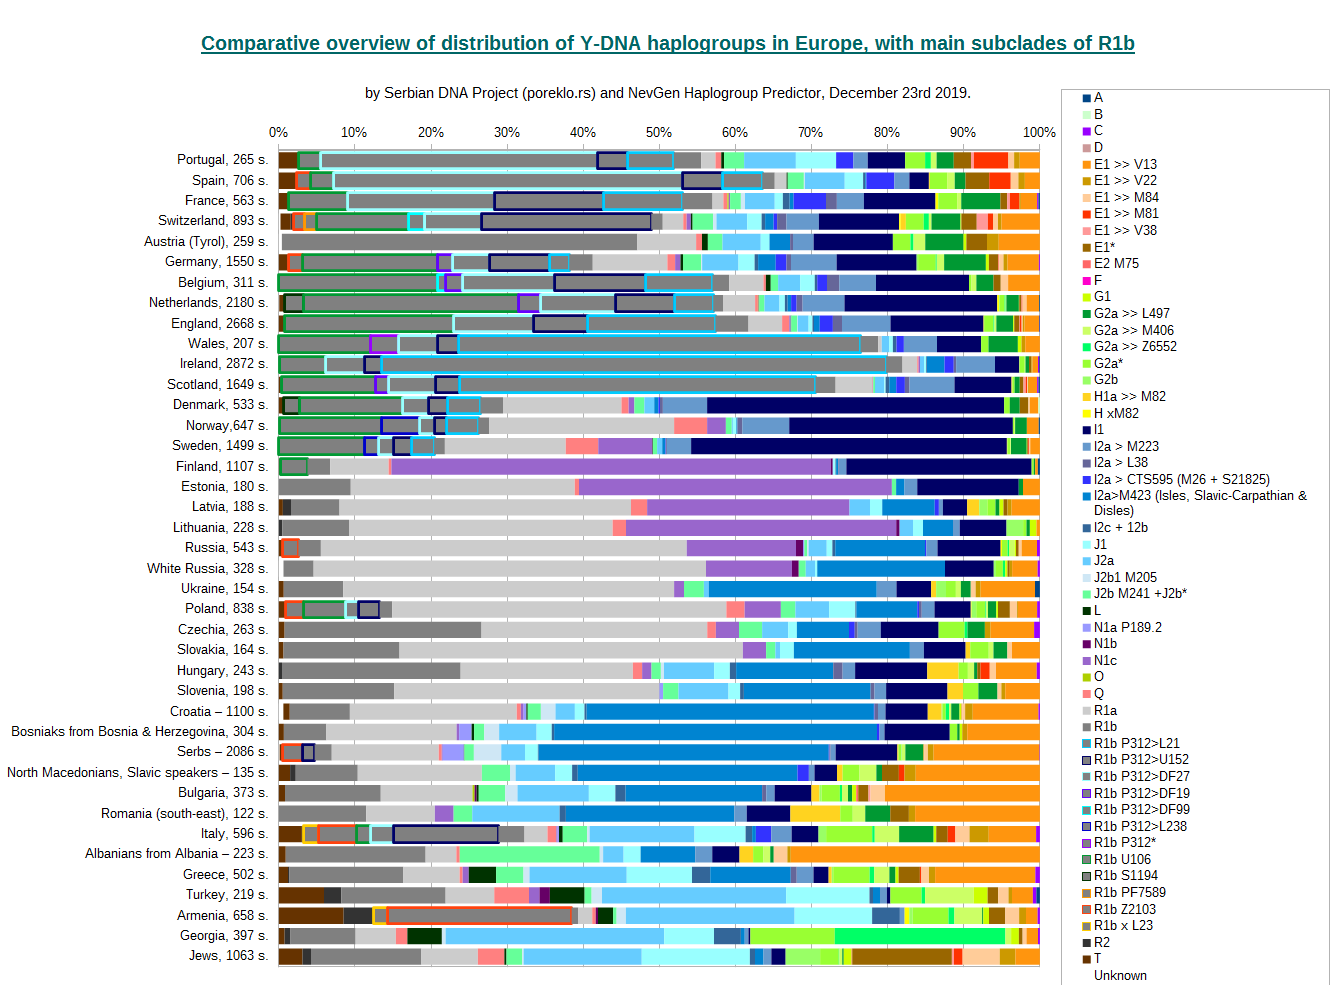 Comparative overview of distribution of Y-DNA haplogroups in Europe, with division of R1b - horizontal bars